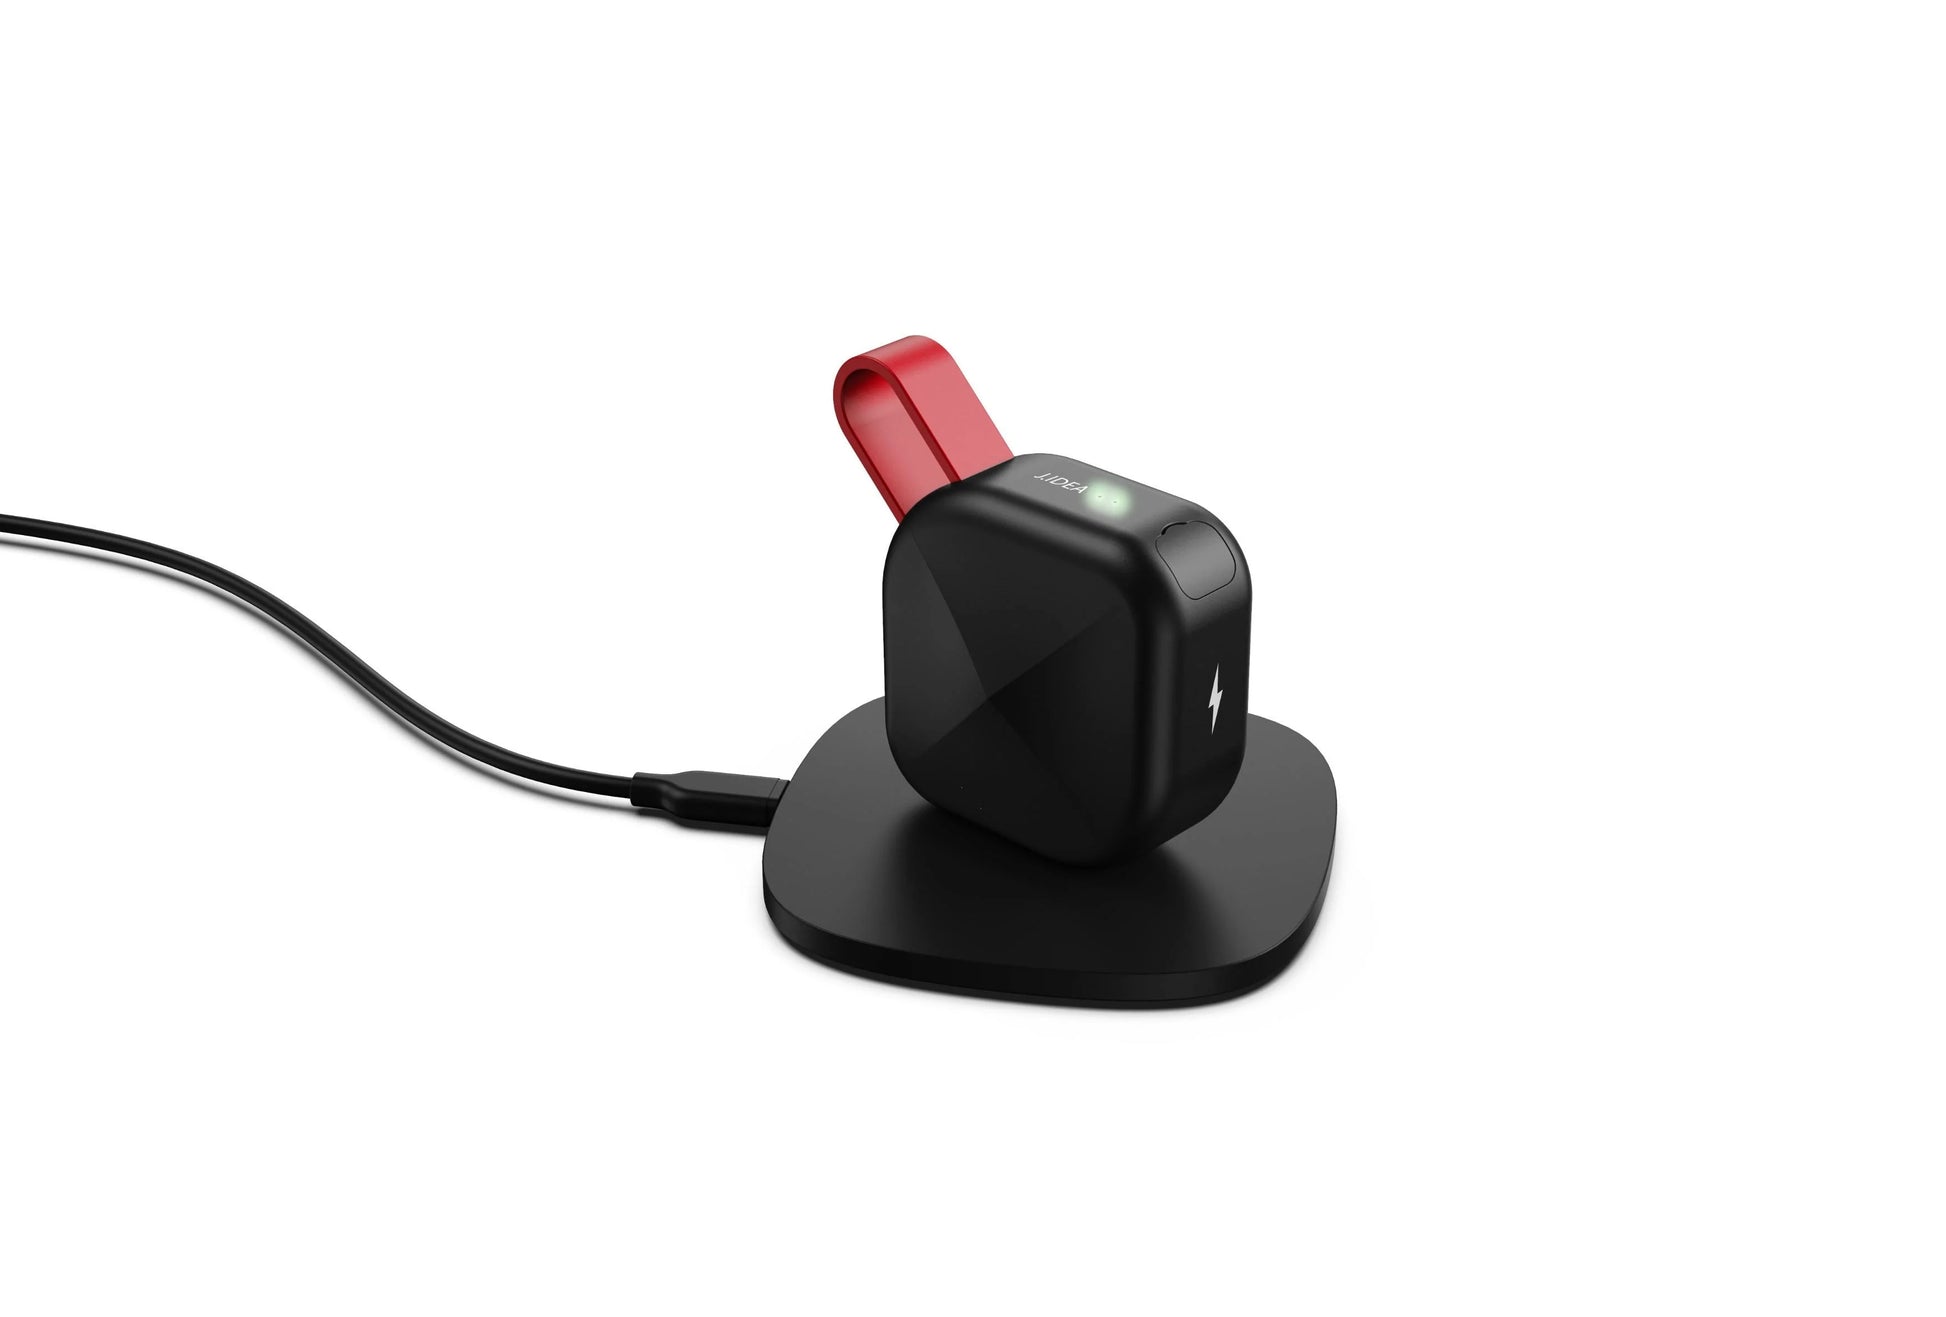 TyRoq Full Bass Waterproof Wireless Charging Earbud - Buy Confidently with Smart Sales Australia